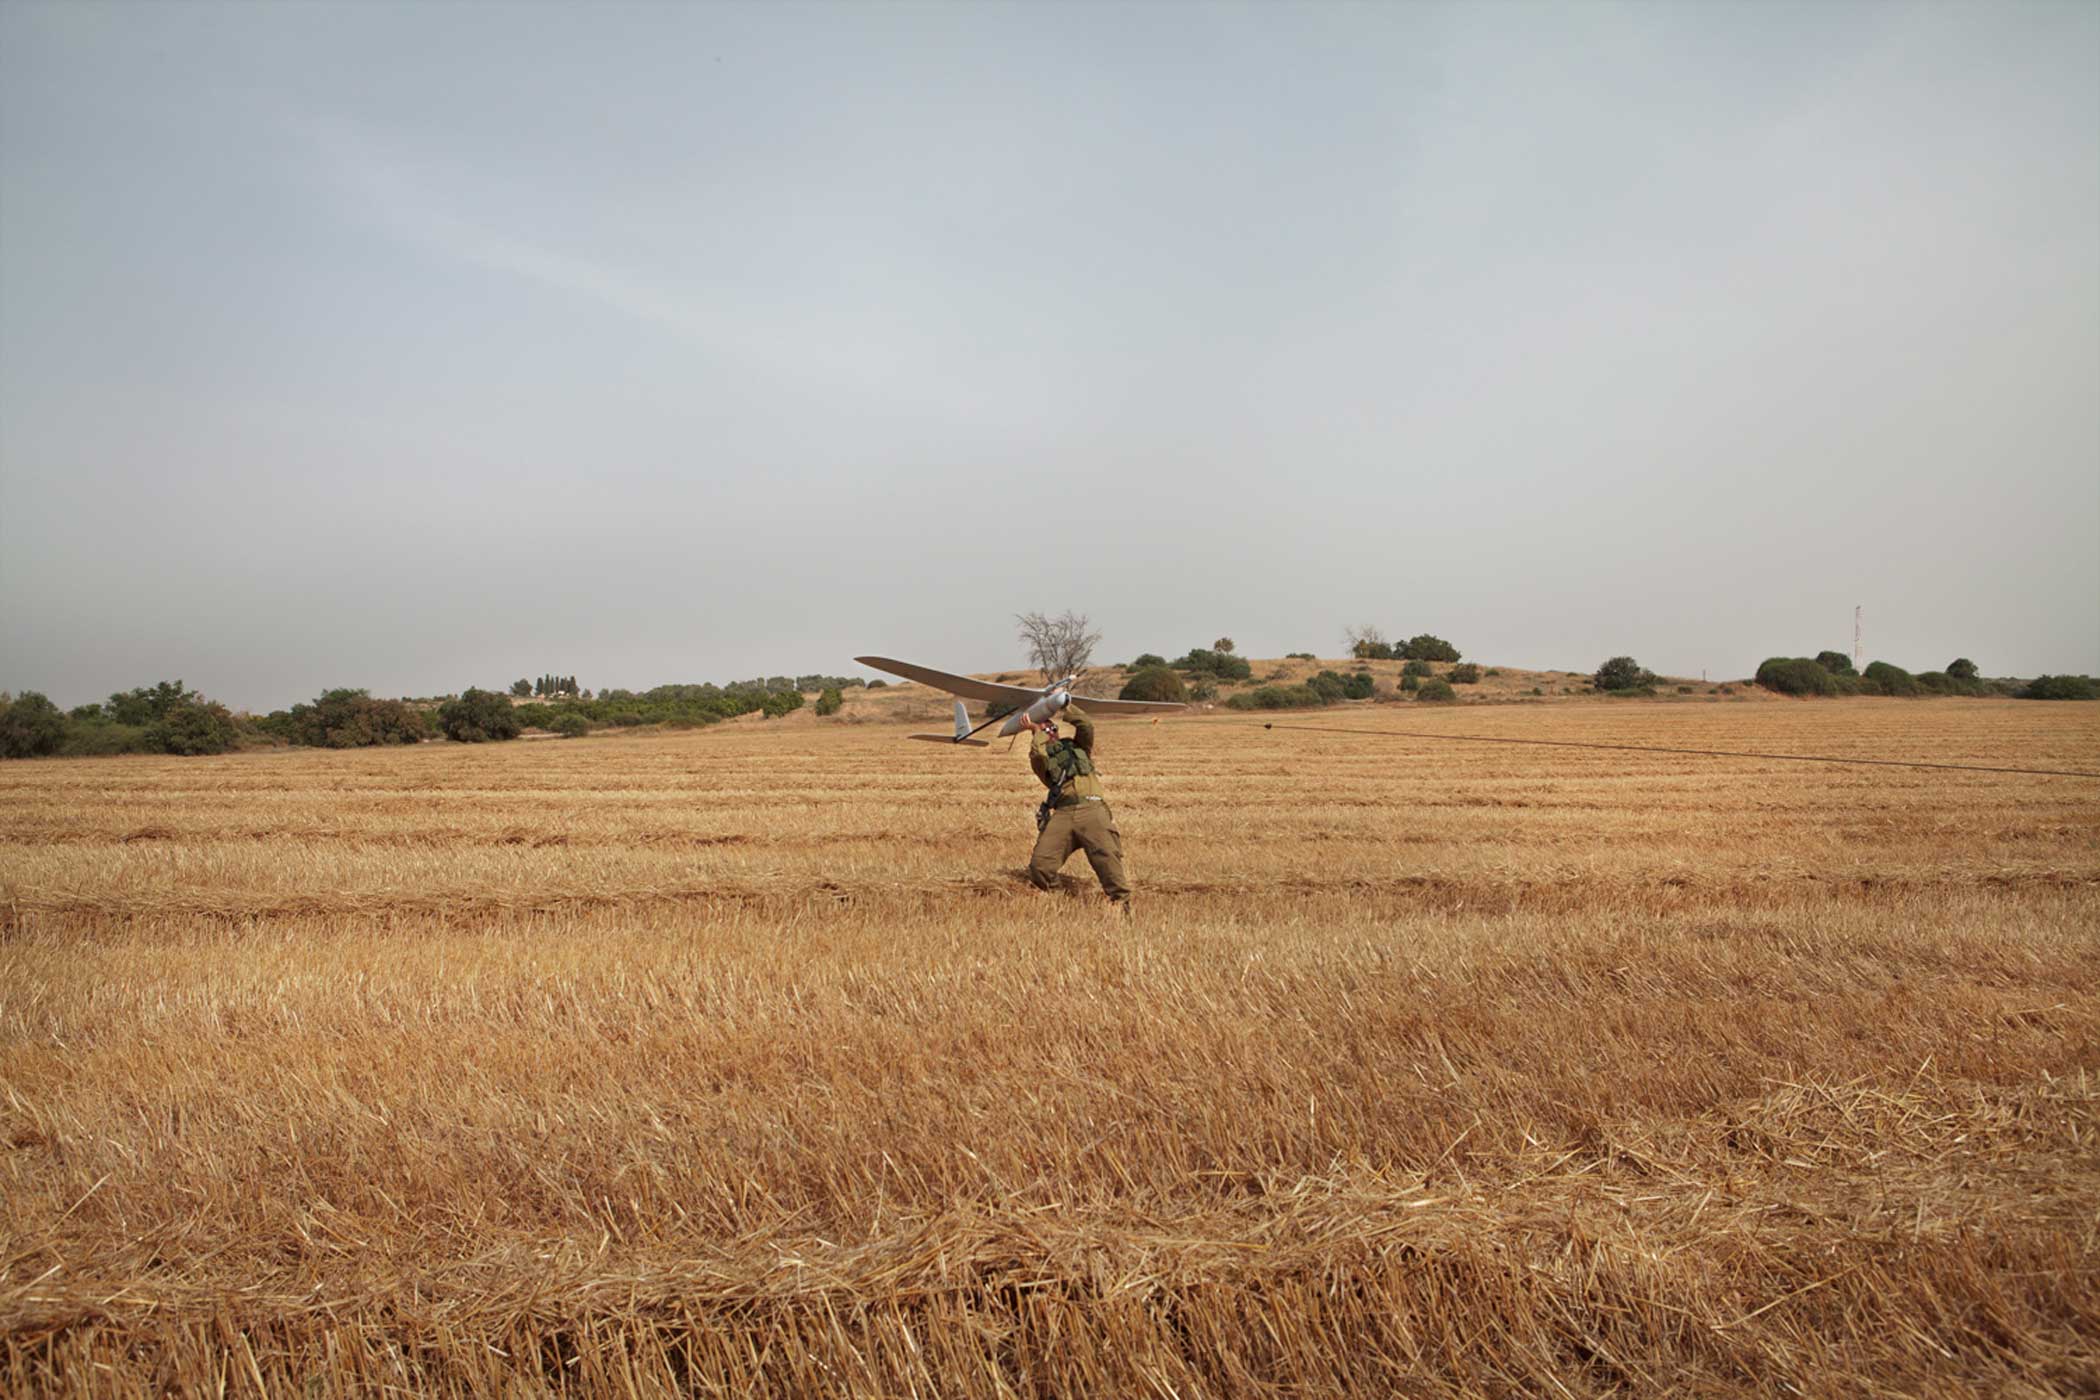 An Israeli soldier from the Sky Rider Unit launches a Skylark mini-Unmanned Arial Vehicle (UAV) during a demonstration close to the border with Gaza.   Sky Rider units are part of the artillery brigade and operate on the ground either independently or with other infantry soldiers to provide real-time video from the battlefield. The Israeli military began using the Skylark system in 2008 but it was not deployed extensively until Operation Protective Edge in the summer of 2014.   The Sky Rider unit lives with the infantry soldiers they serve with and support during their missions, unlike pilots in the Israeli Air Force (IAF) who fly larger drones and are stationed on bases far away from where the drones fly.  The drone is built by the Israeli company Elbit Systems. It weighs around 7 kilograms and can stay in the air for up to 3 hours. It’s used for intelligence, surveillance and reconnaissance (ISR) missions.